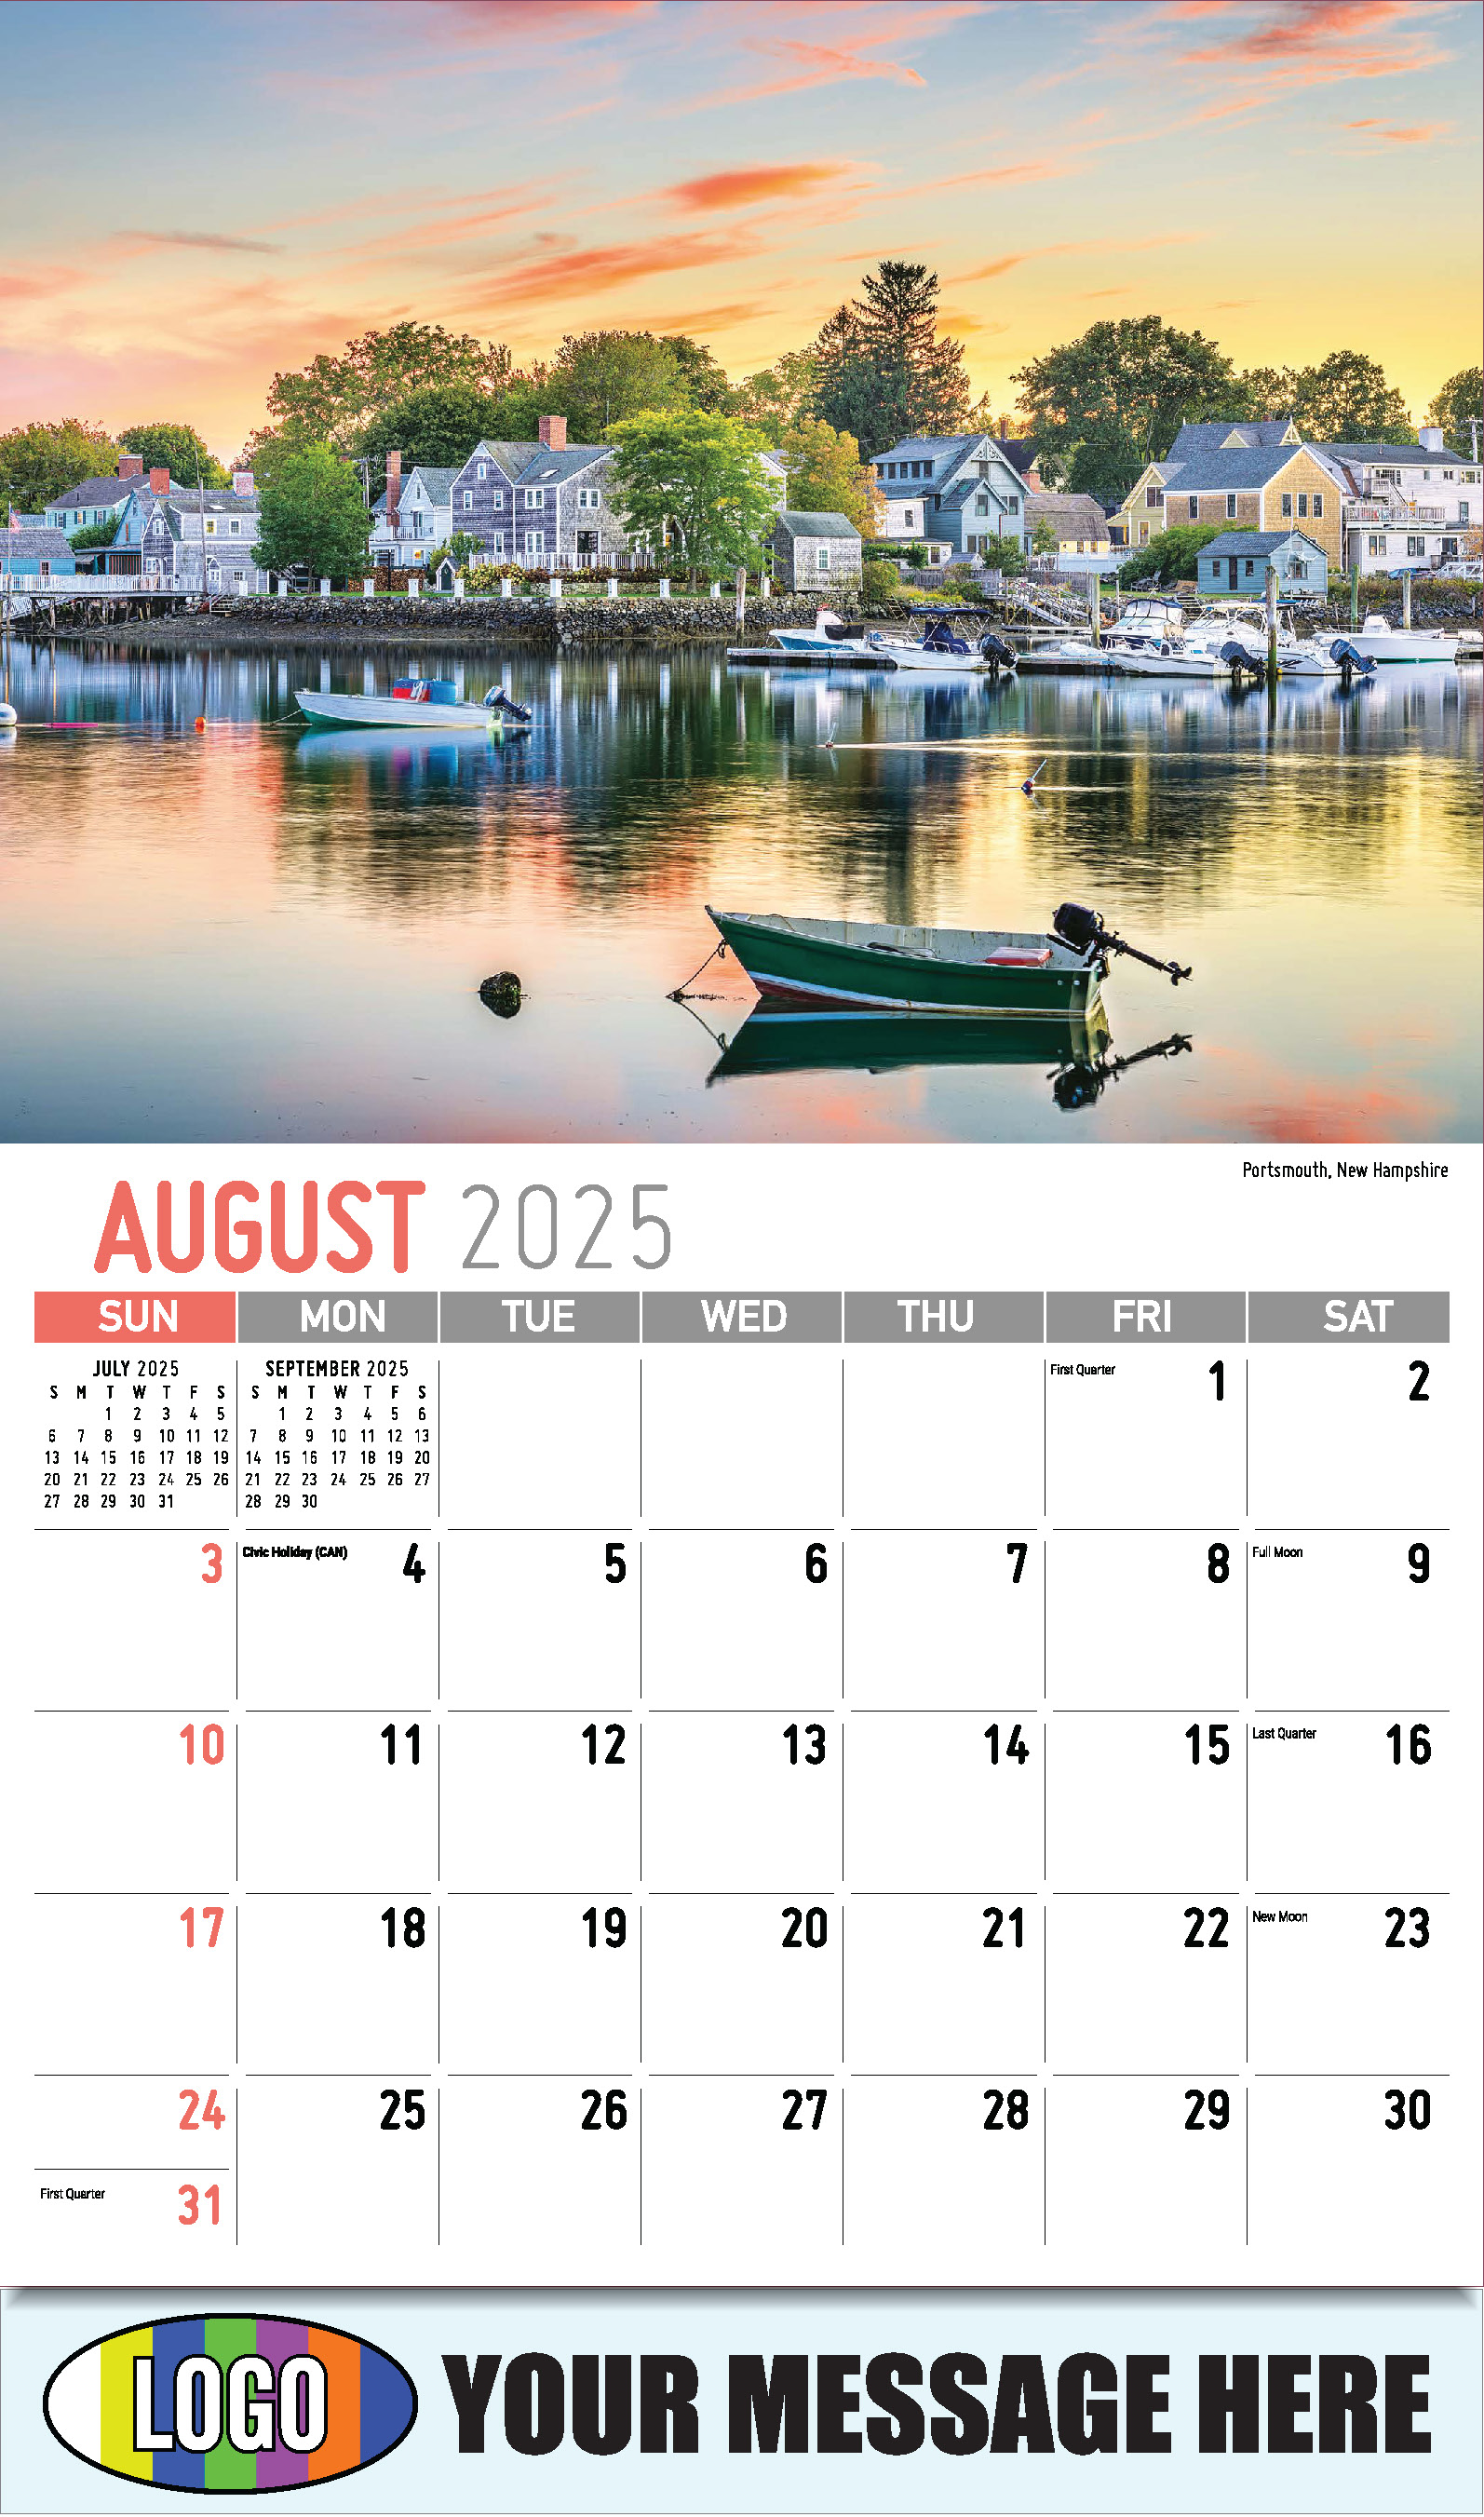 Scenes of New England 2025 Business Advertising Wall Calendar - August